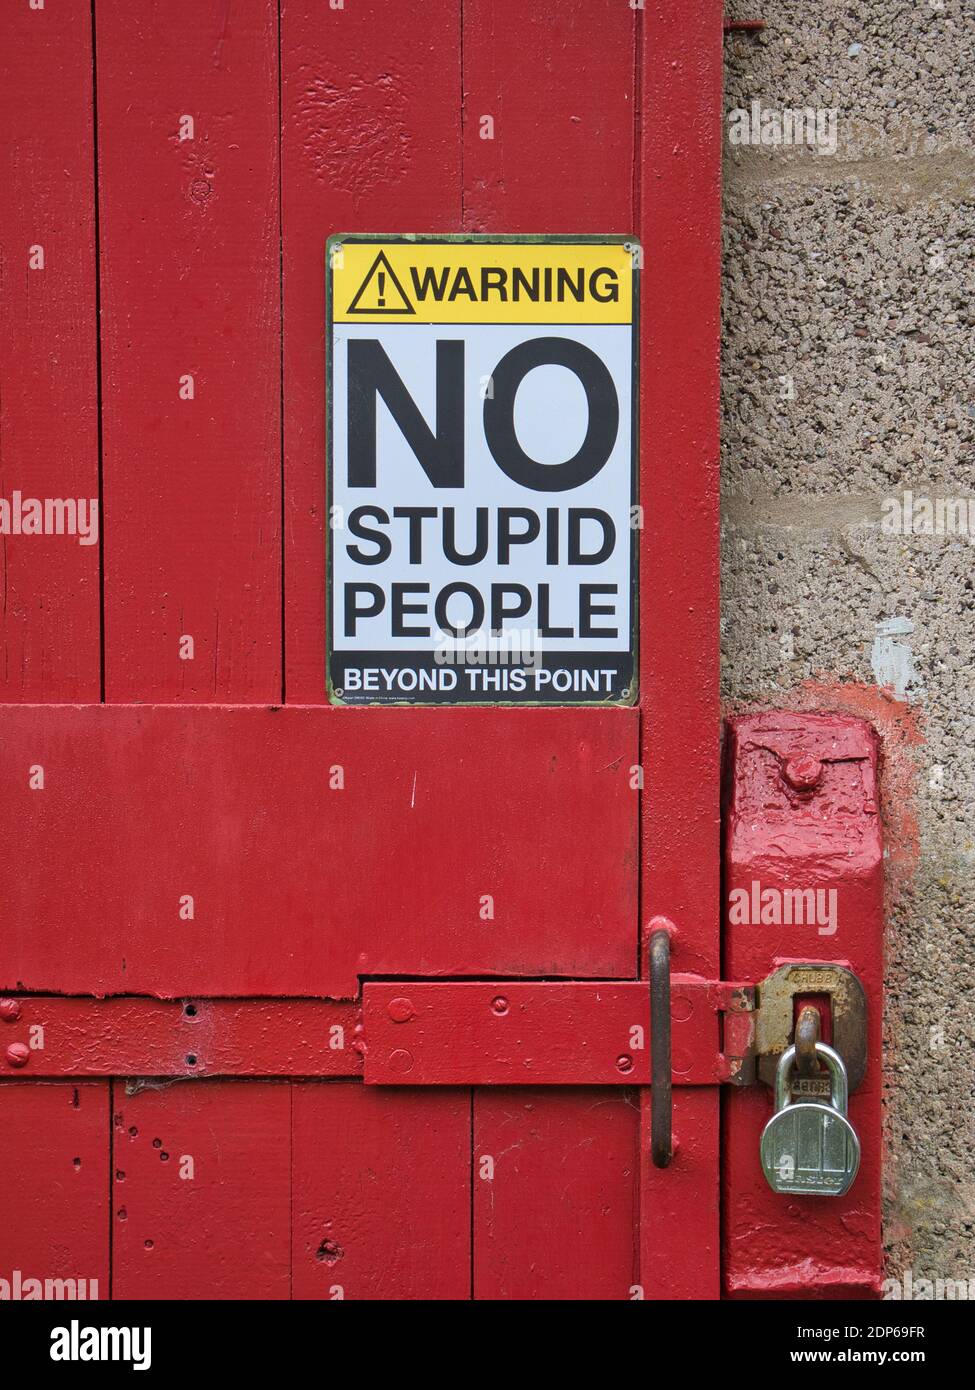 A humorous safety sign saying 'Warning! No stupid people beyond this point' fixed to a red, wooden door locked with a padlock and hasp. Stock Photo